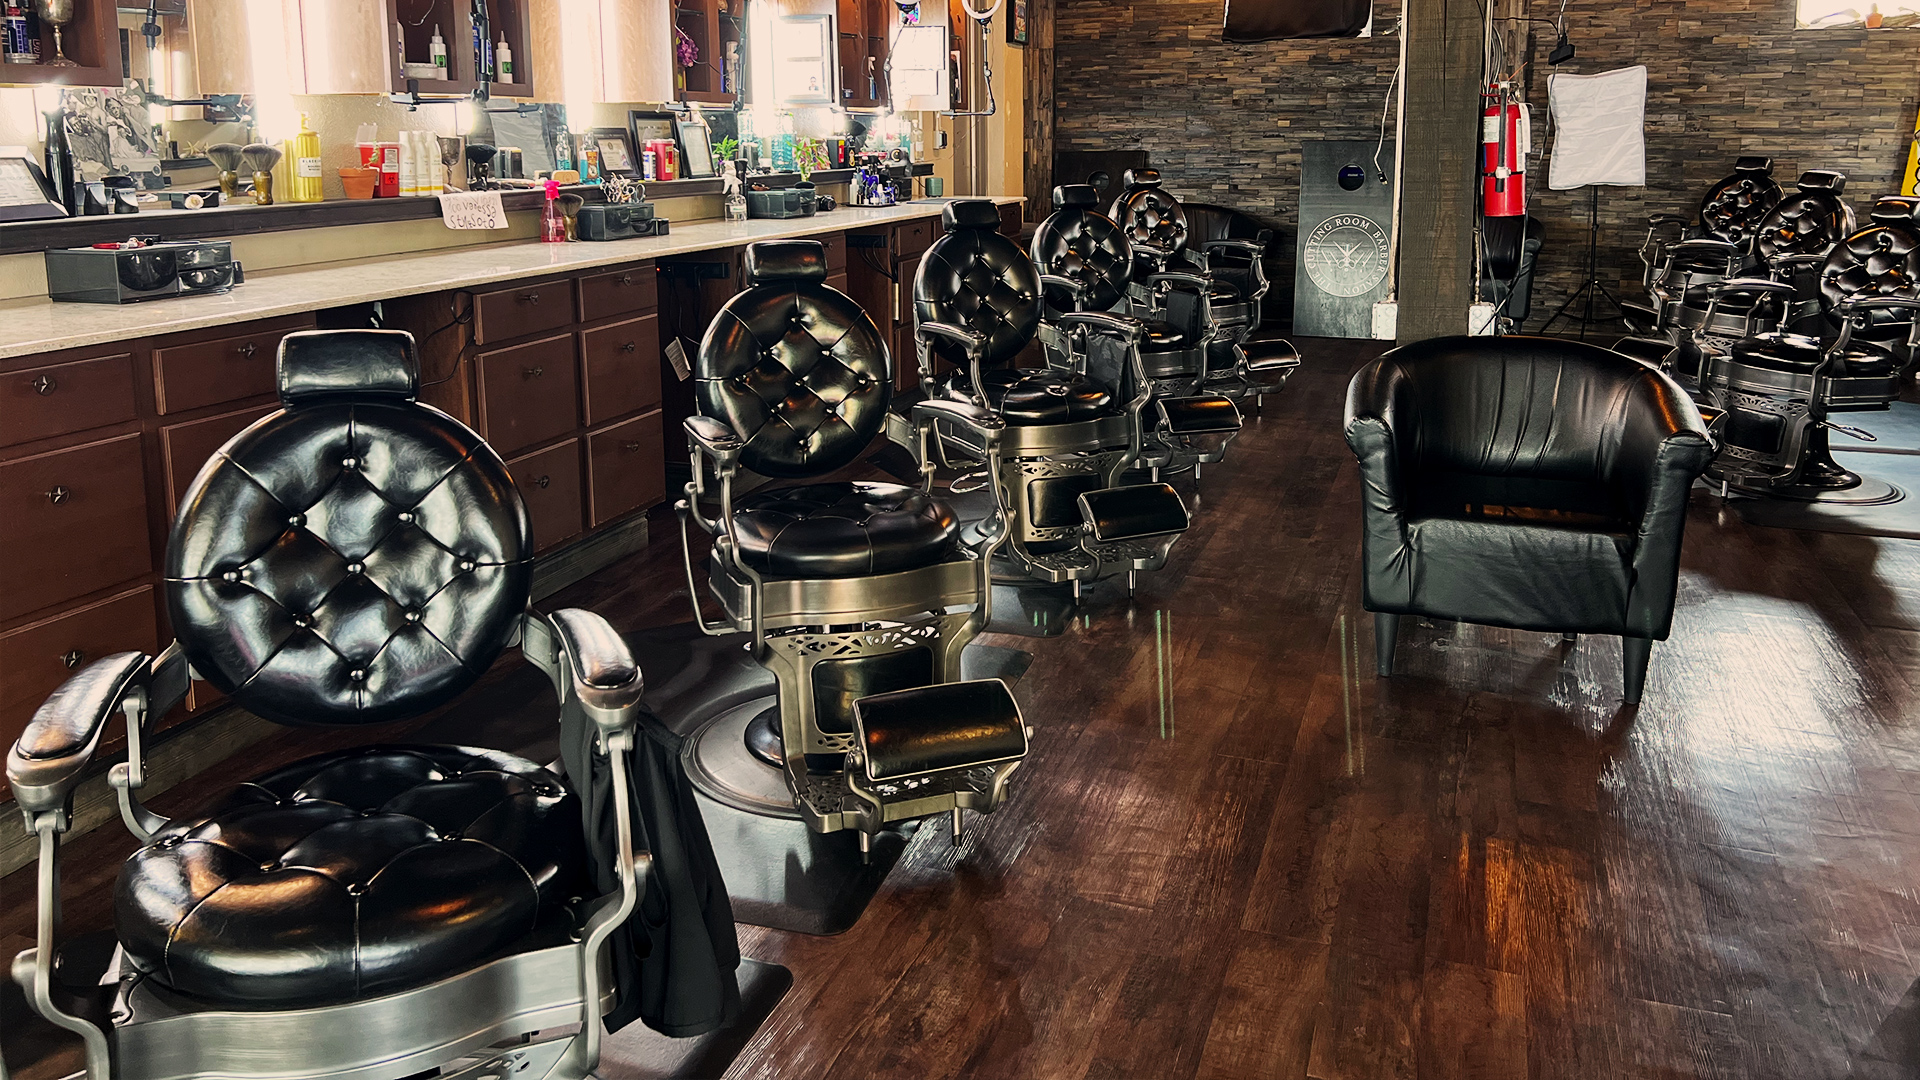 Black leather barber chairs are in two rows with another black leather lounge chair in the middle. Dark hardwood floor and dark cabinets serve a stark contrast to the white counters and lights around the mirrors.